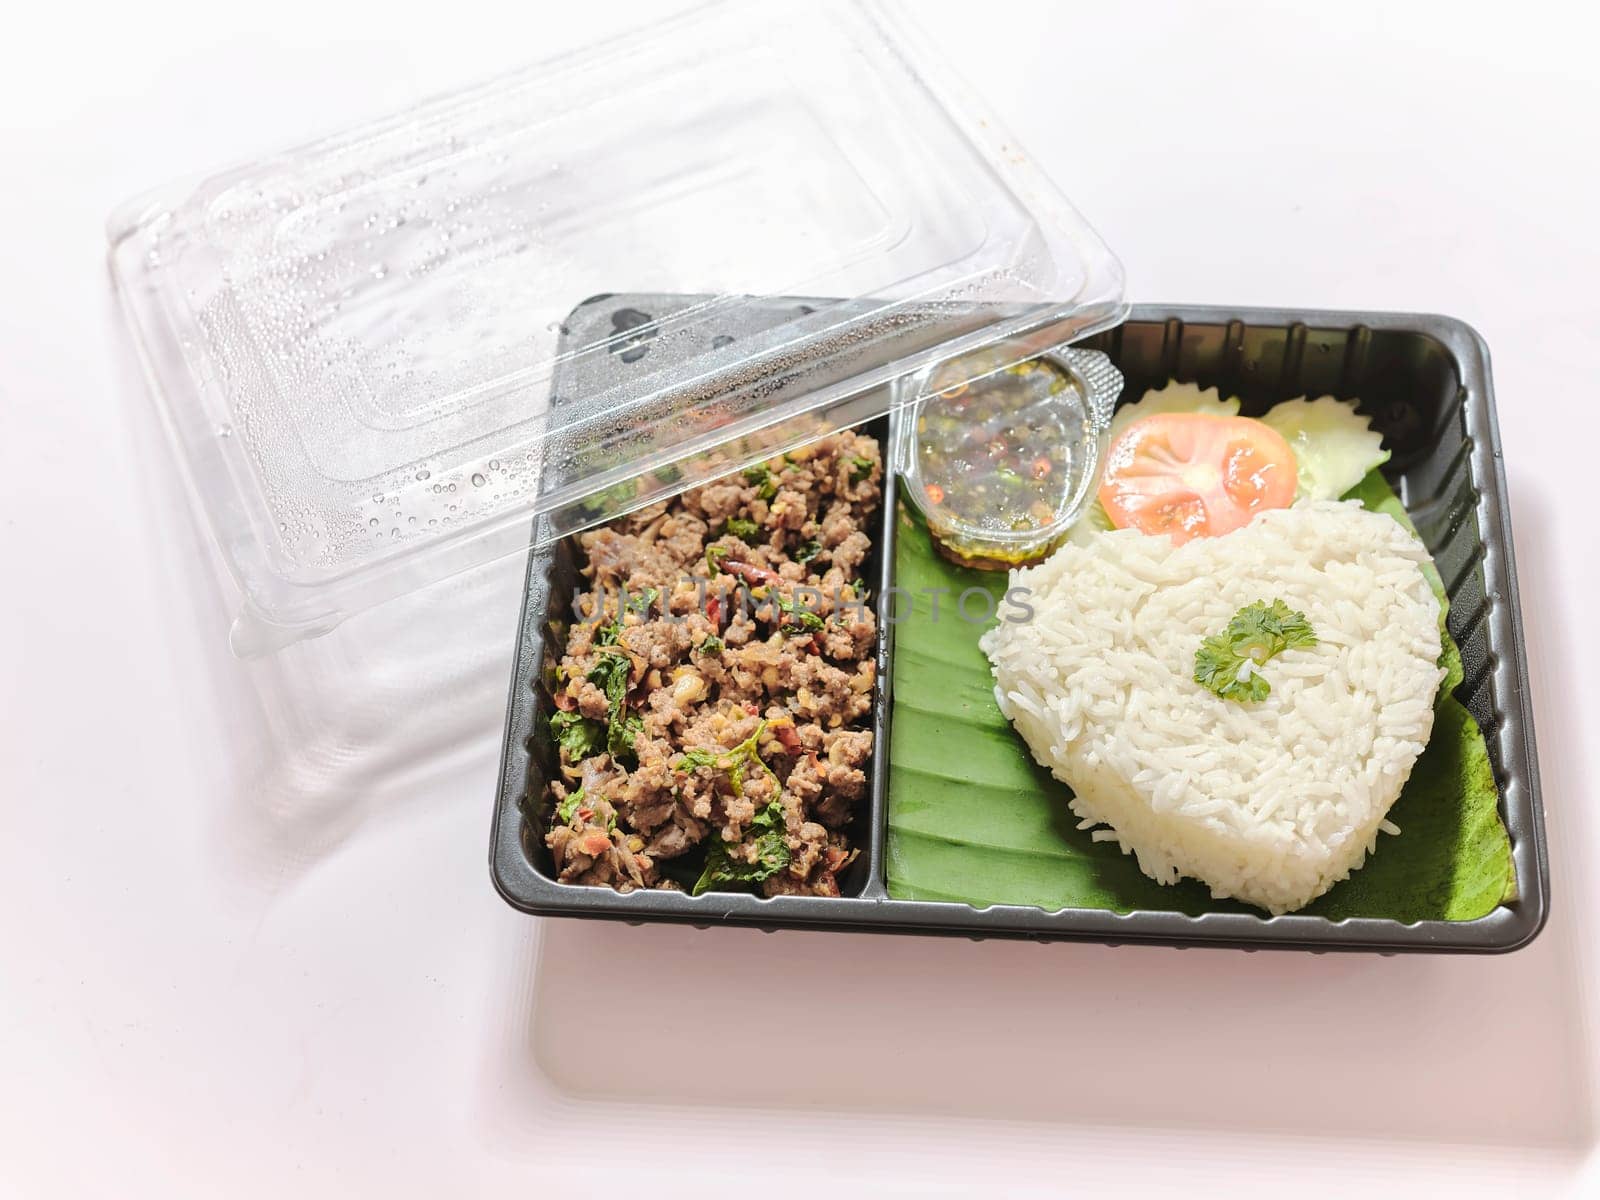 Basil fried rice with pork in plastic box at street market  by Hepjam